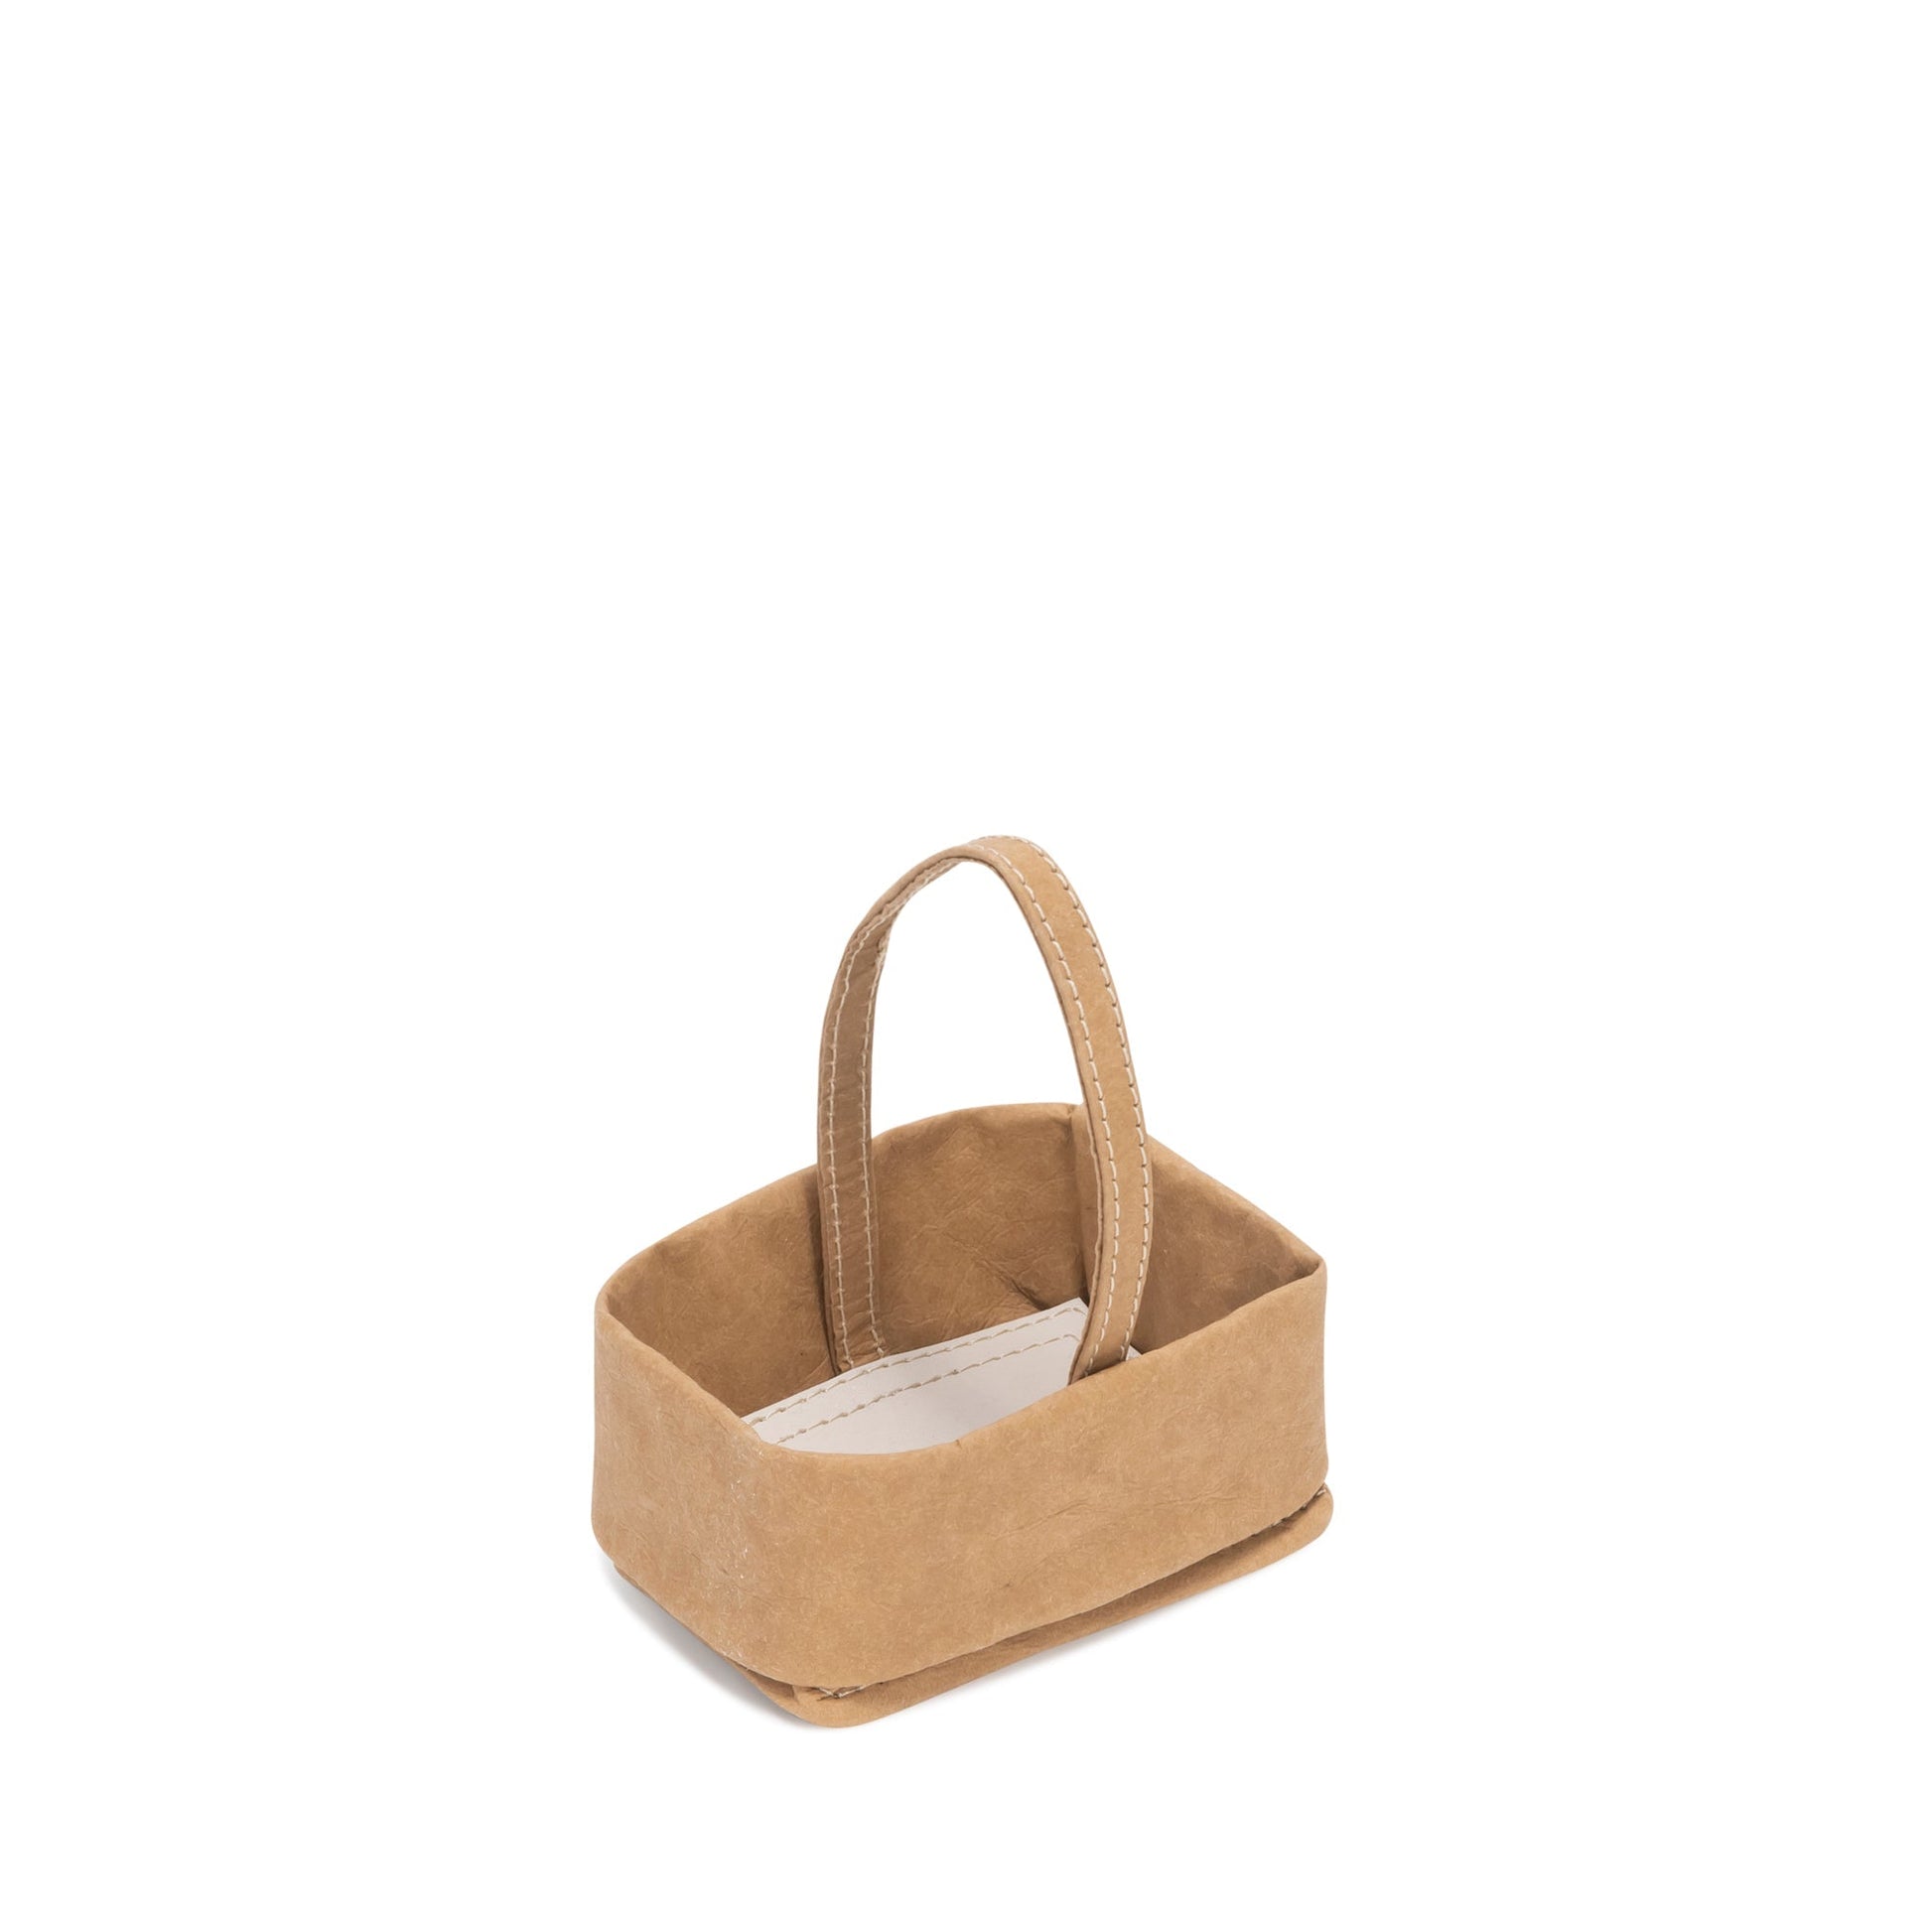 A small rectangular washable paper salt and pepper holder is shown with a washable paper small carry handle. The salt and pepper holder shown is tan.